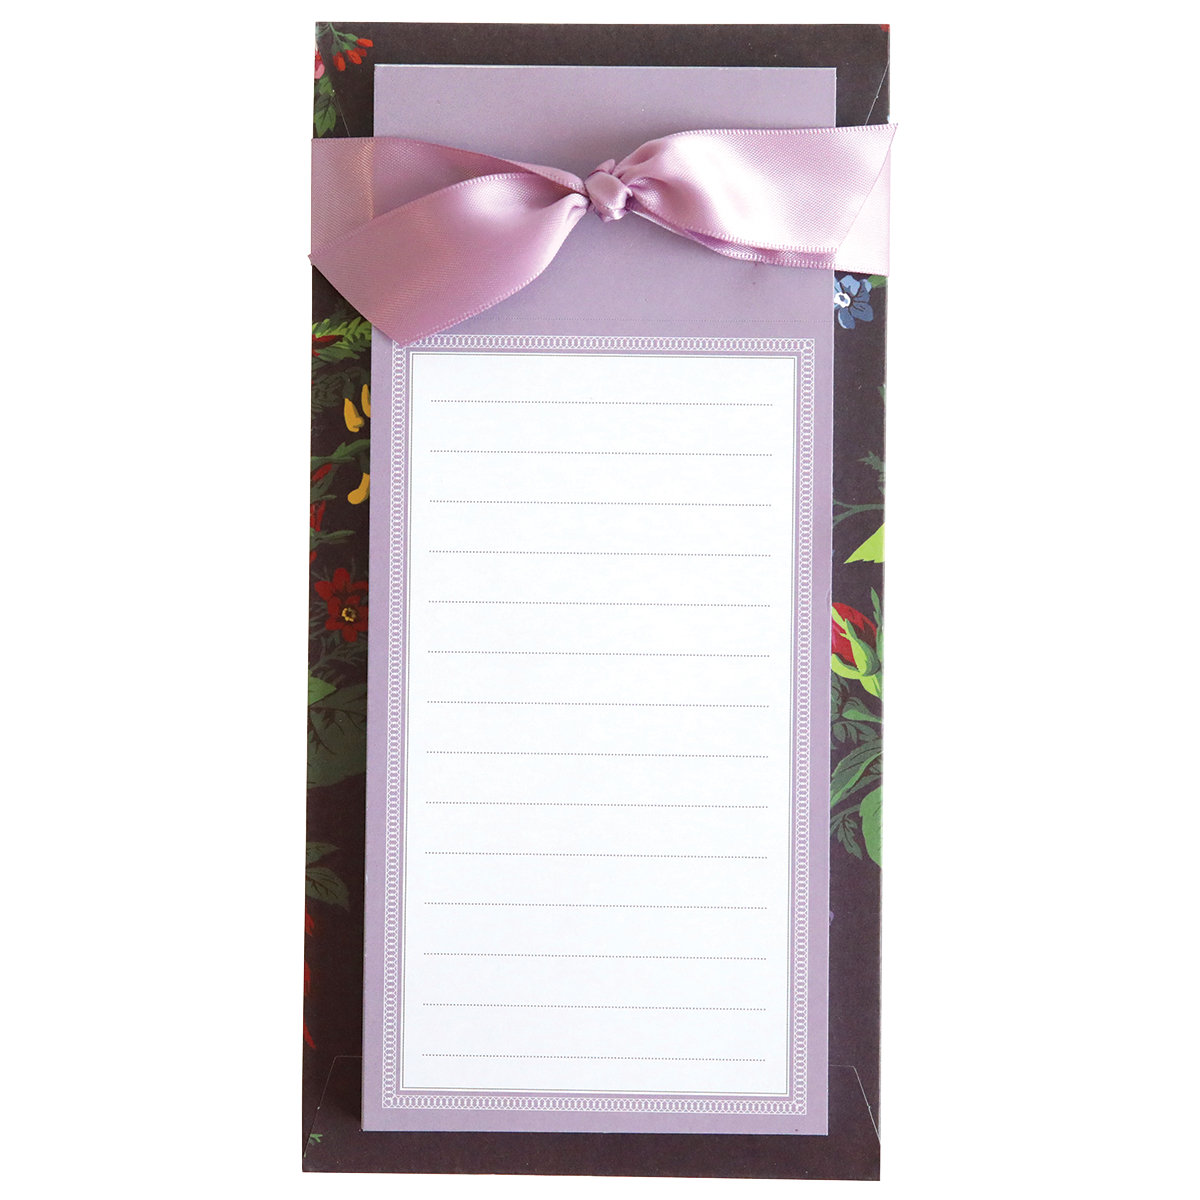 Astrid Floral List Pads note card with a pink ribbon detail on a tropical-themed background.